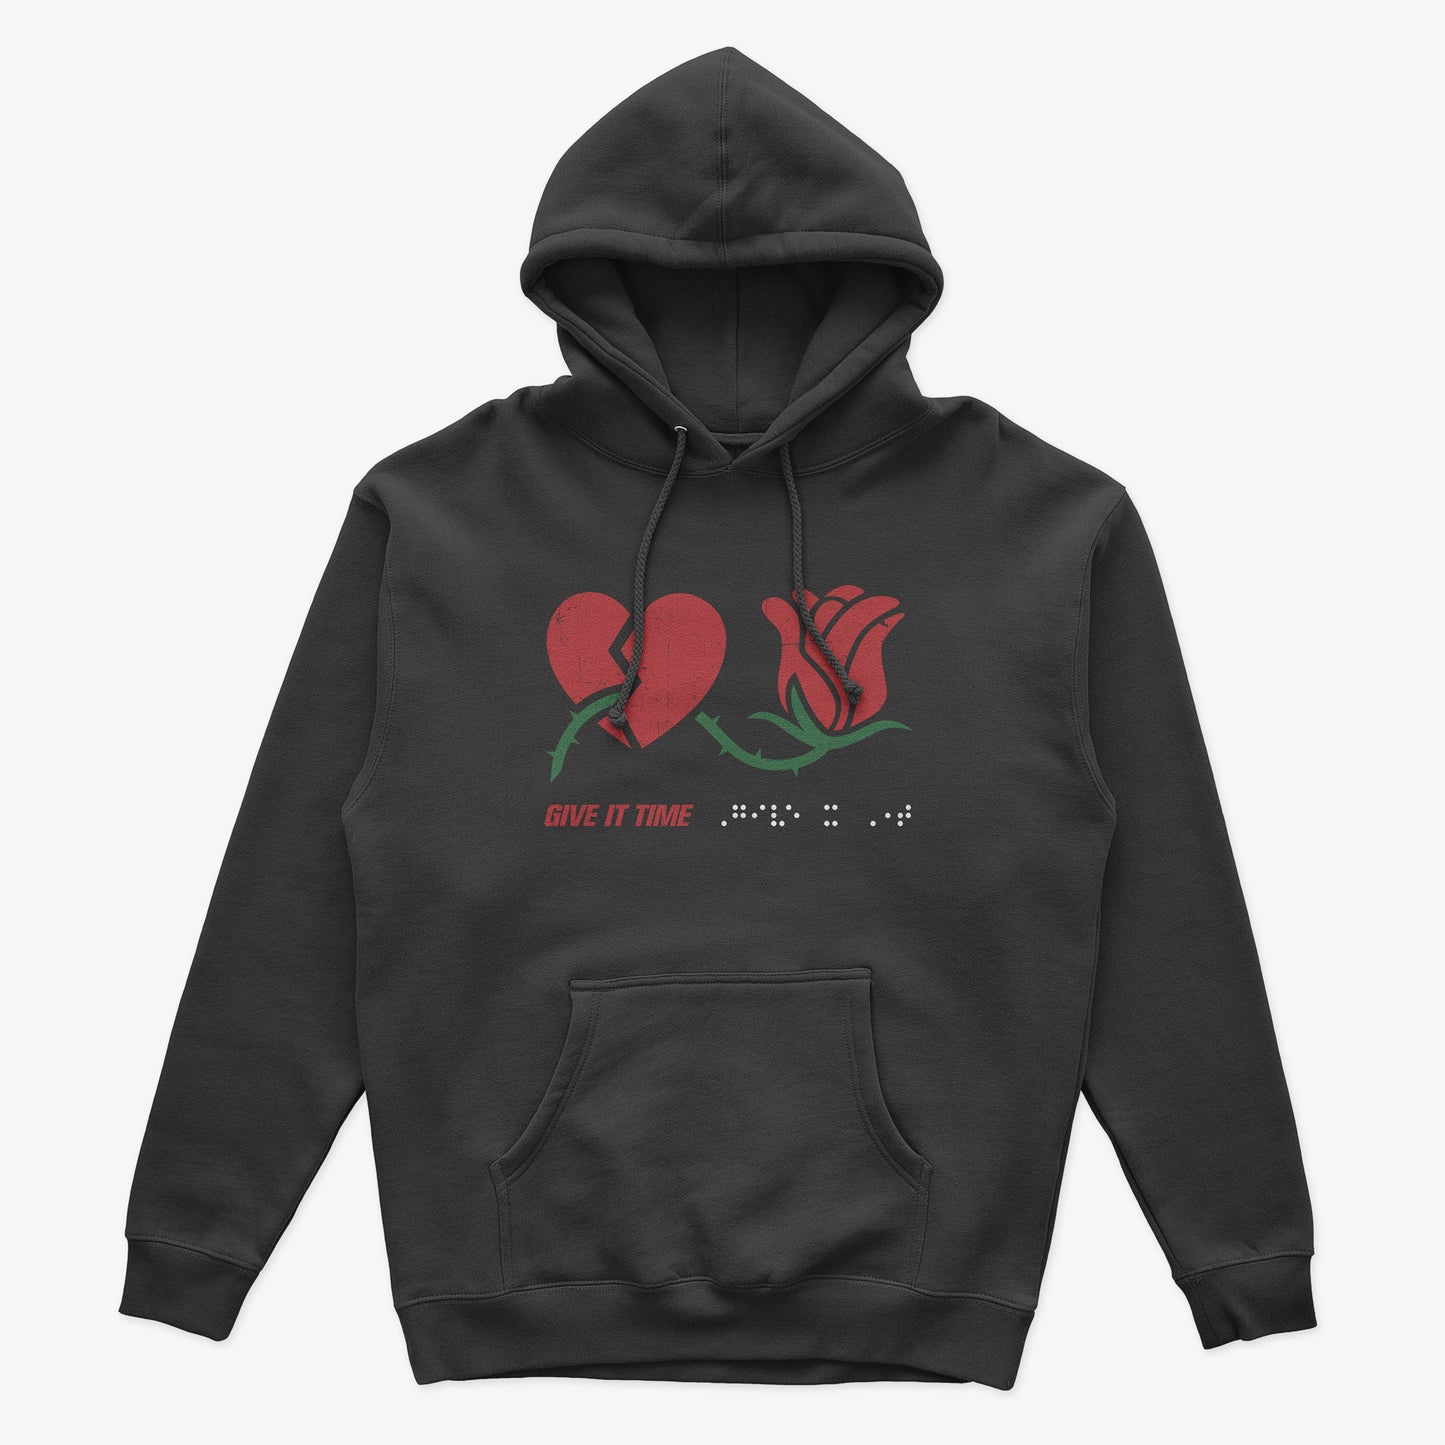 Give It Time - Limited Edition Heavyweight Hoodie